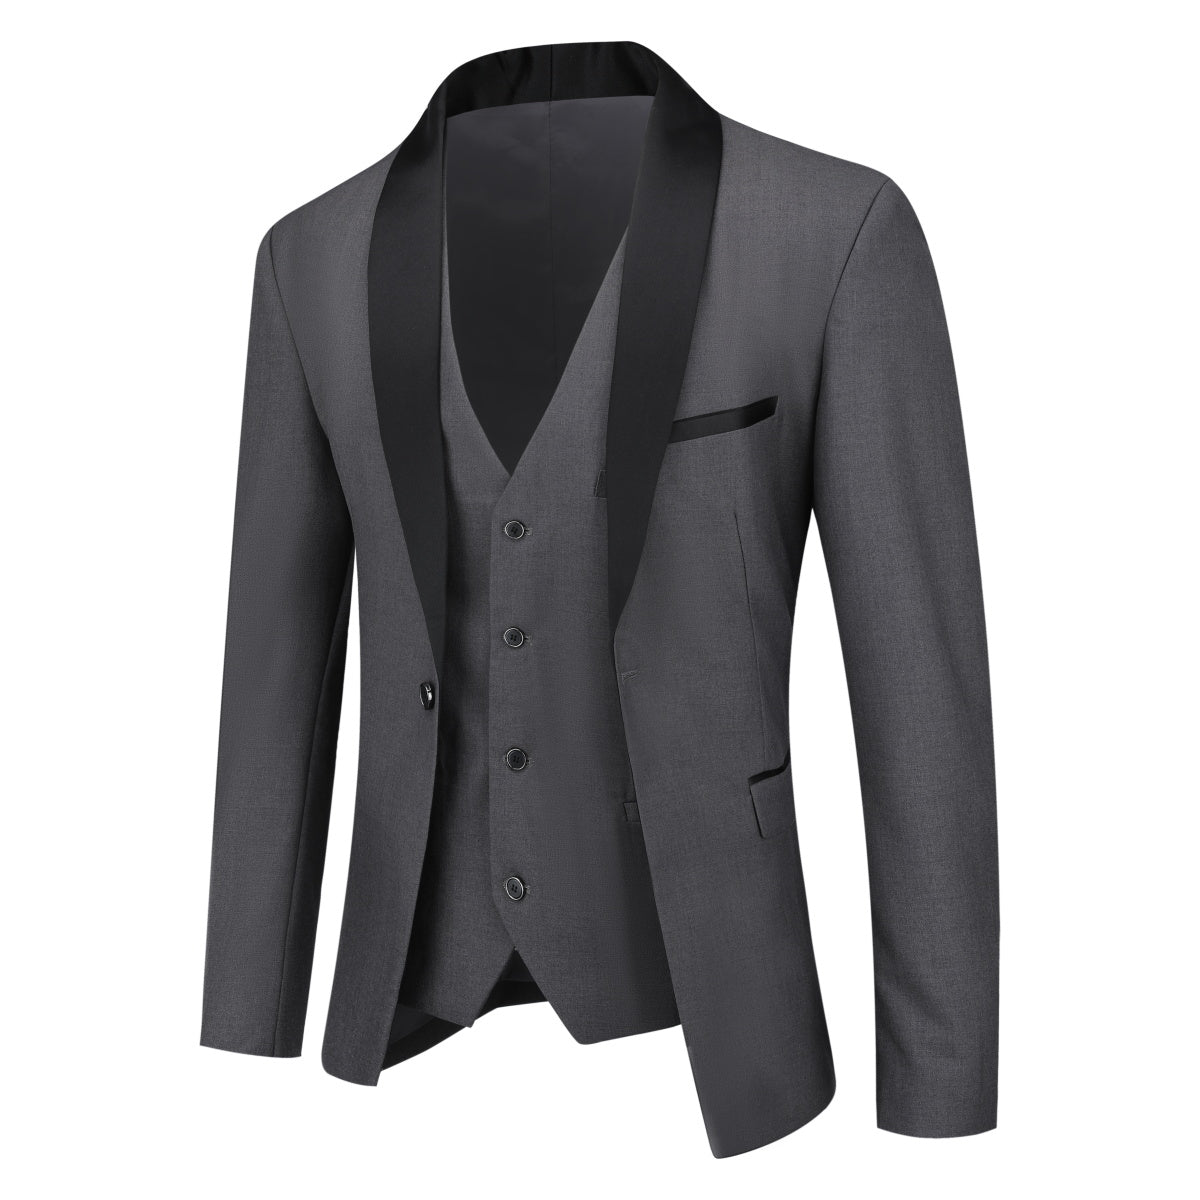 Slim Fit One Button Casual Grey 3-Piece Suit